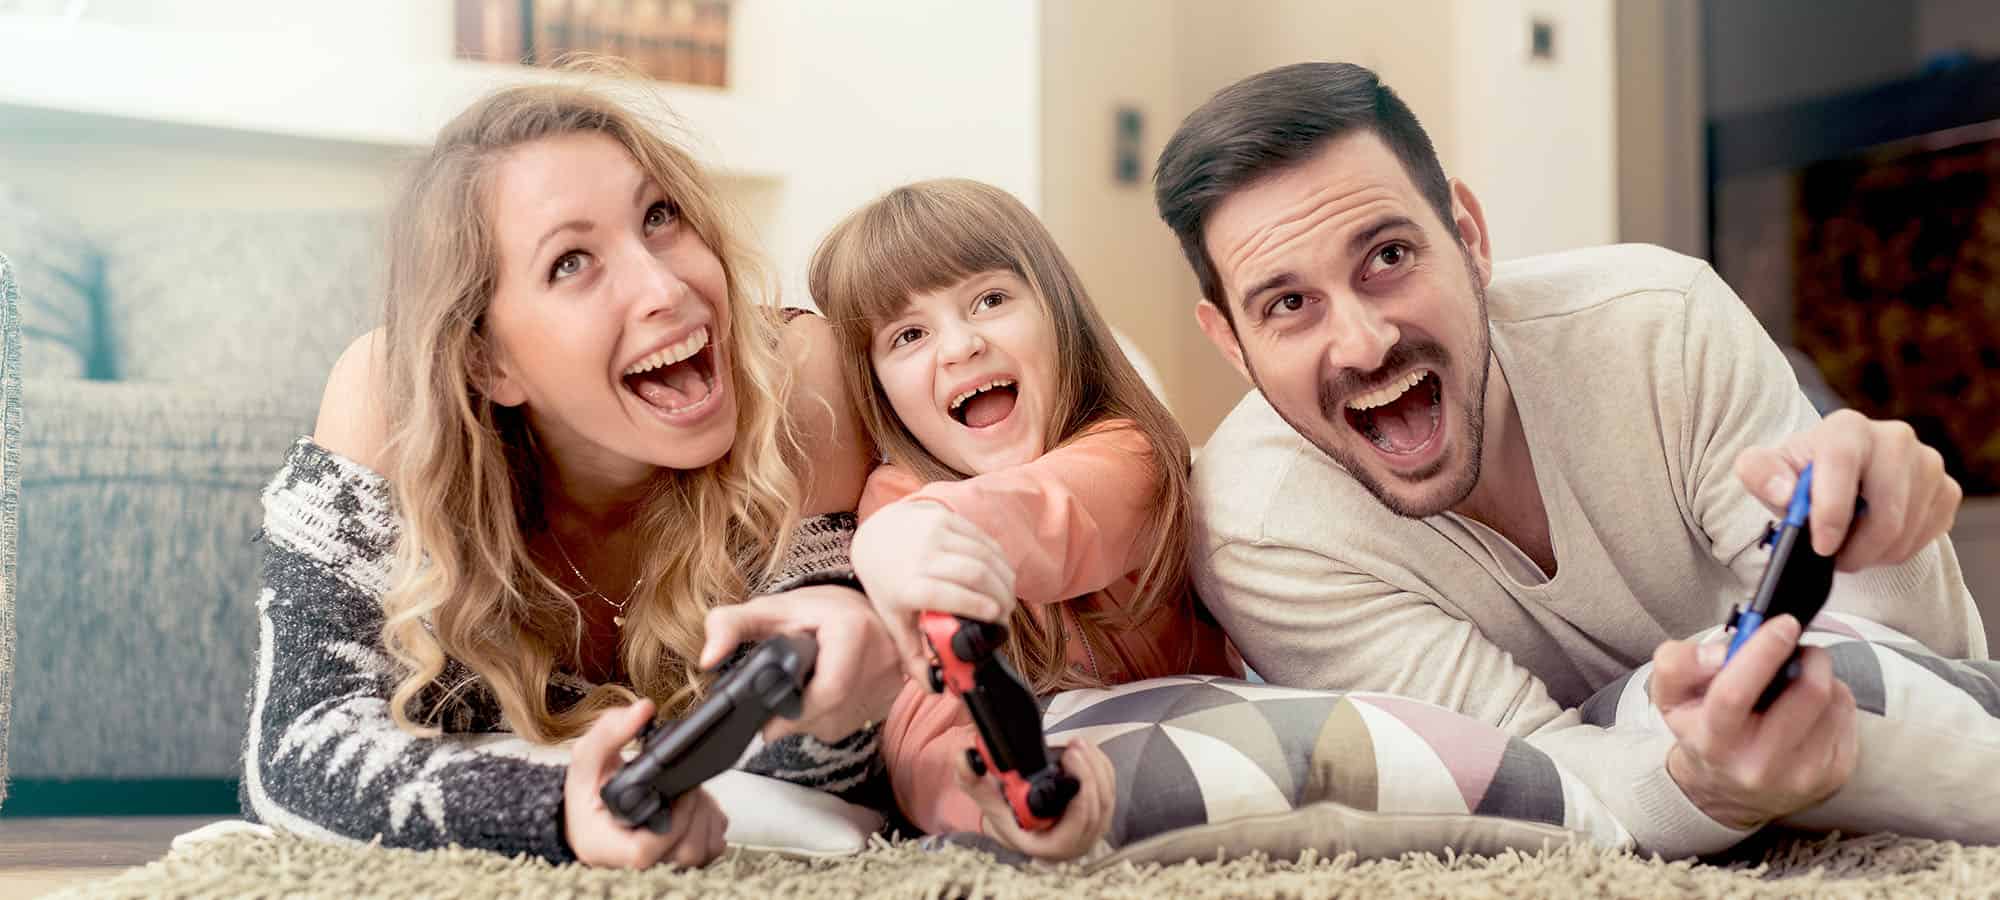 Things You Can Do at Home to Learn, Connect and Have Fun